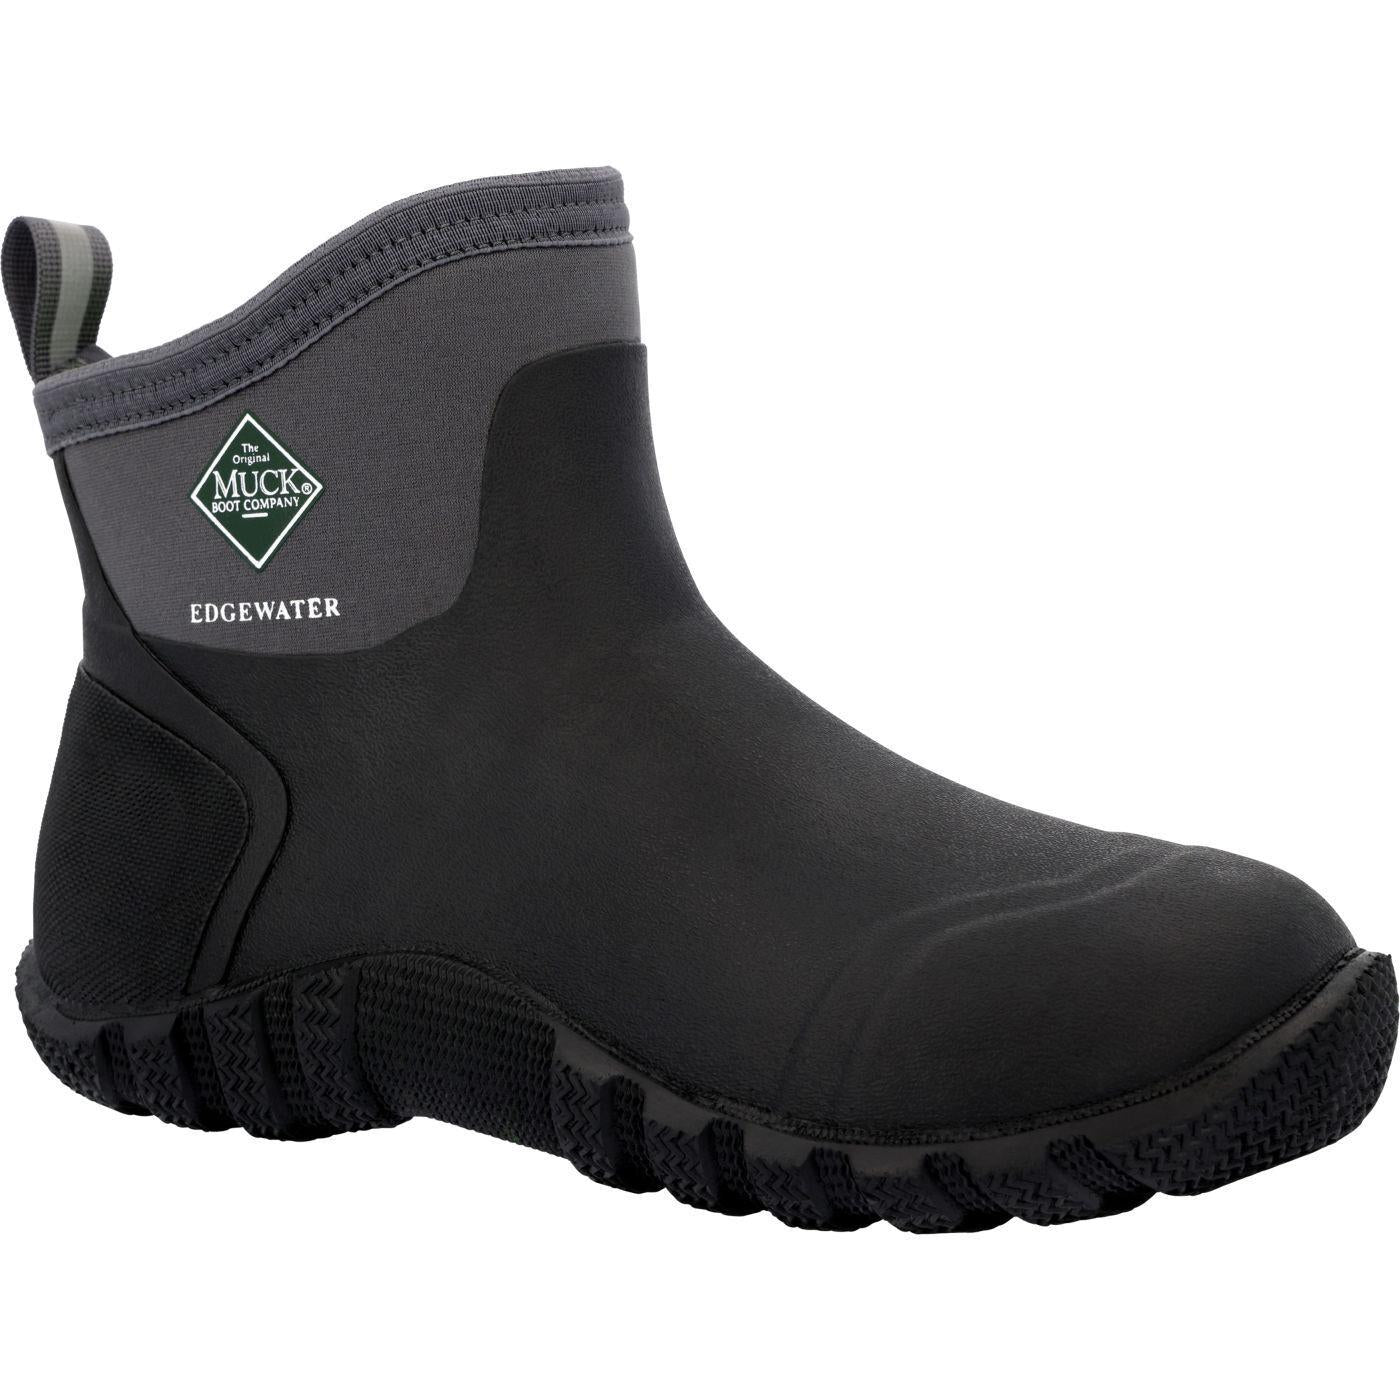 Muck Boots Edgewater Classic waterproof 6" wellington ankle boots